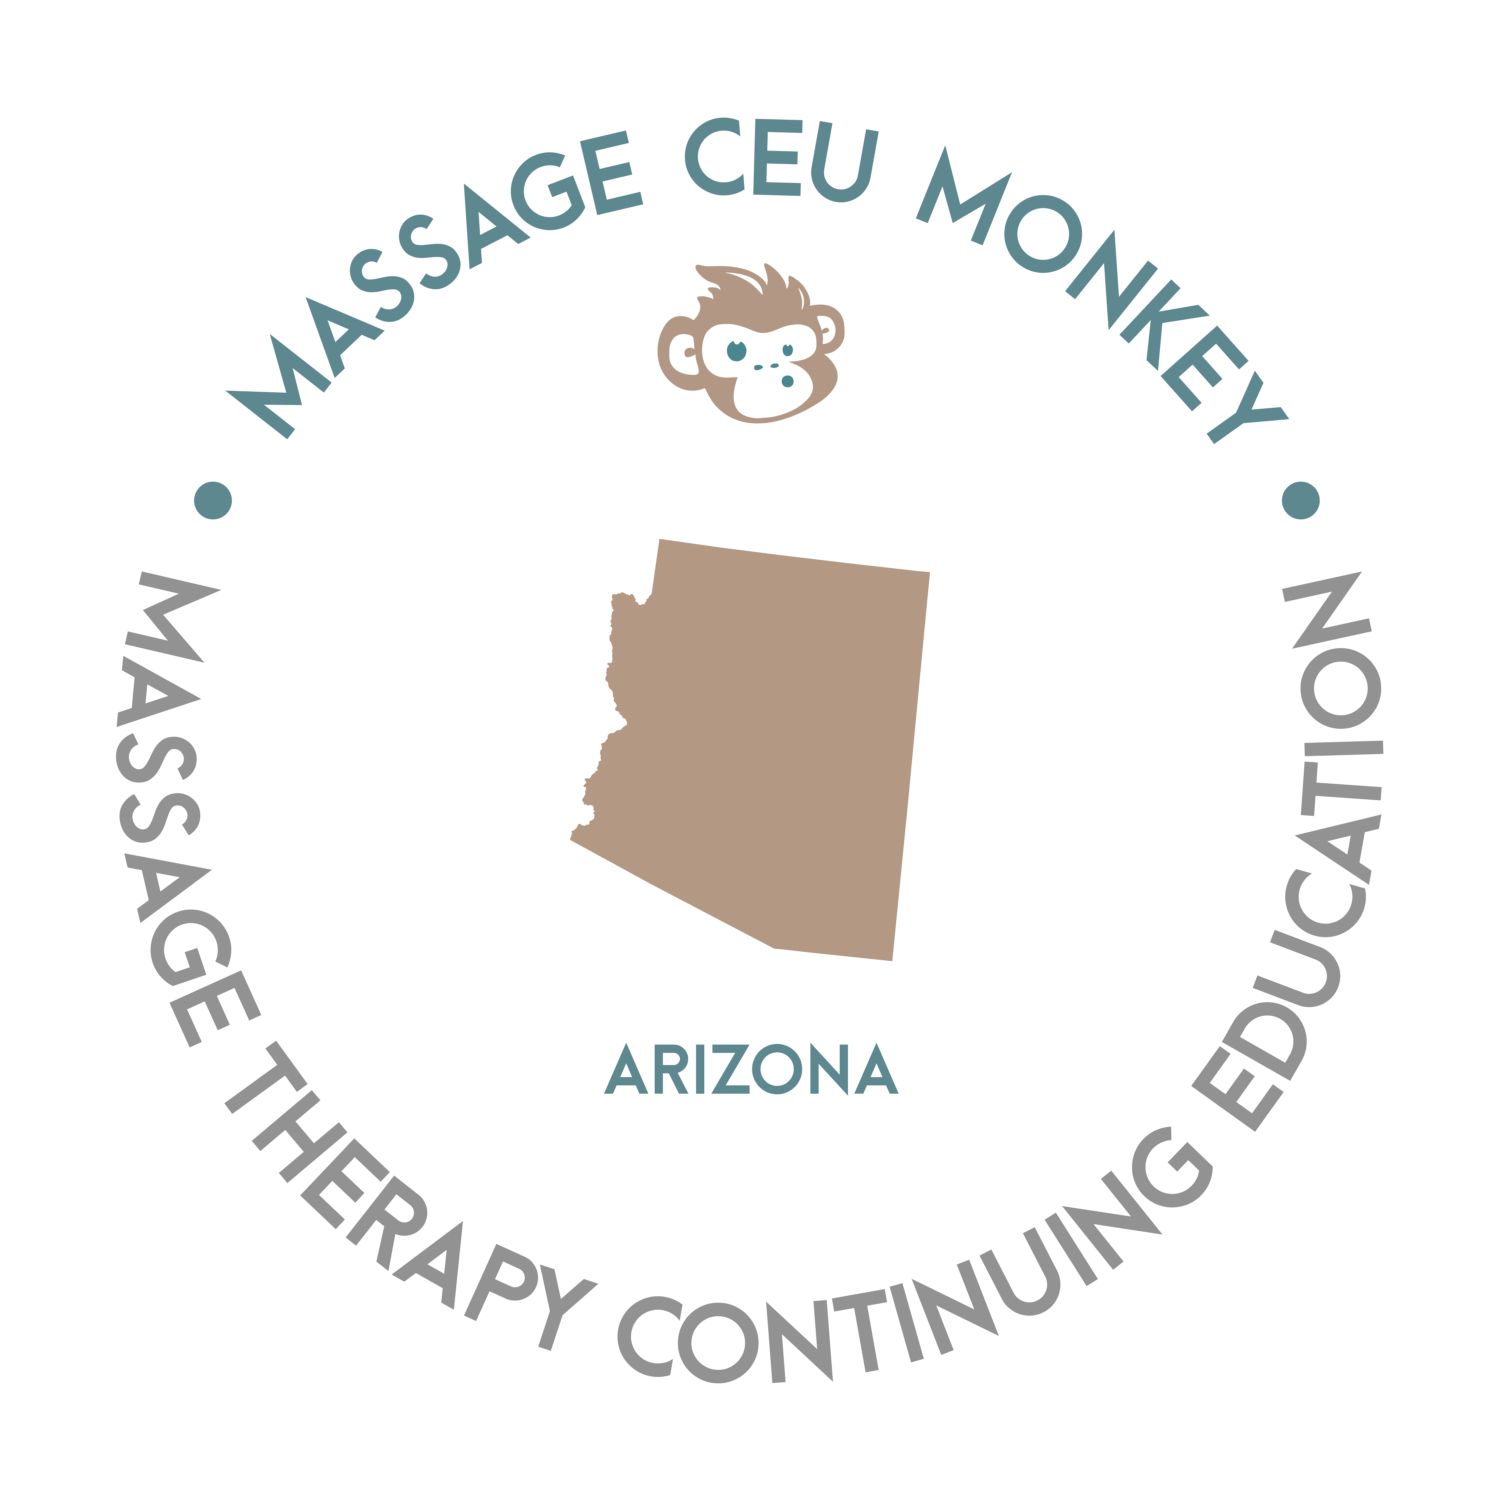 Arizona Massage Therapy Continuing Education Requirements ...